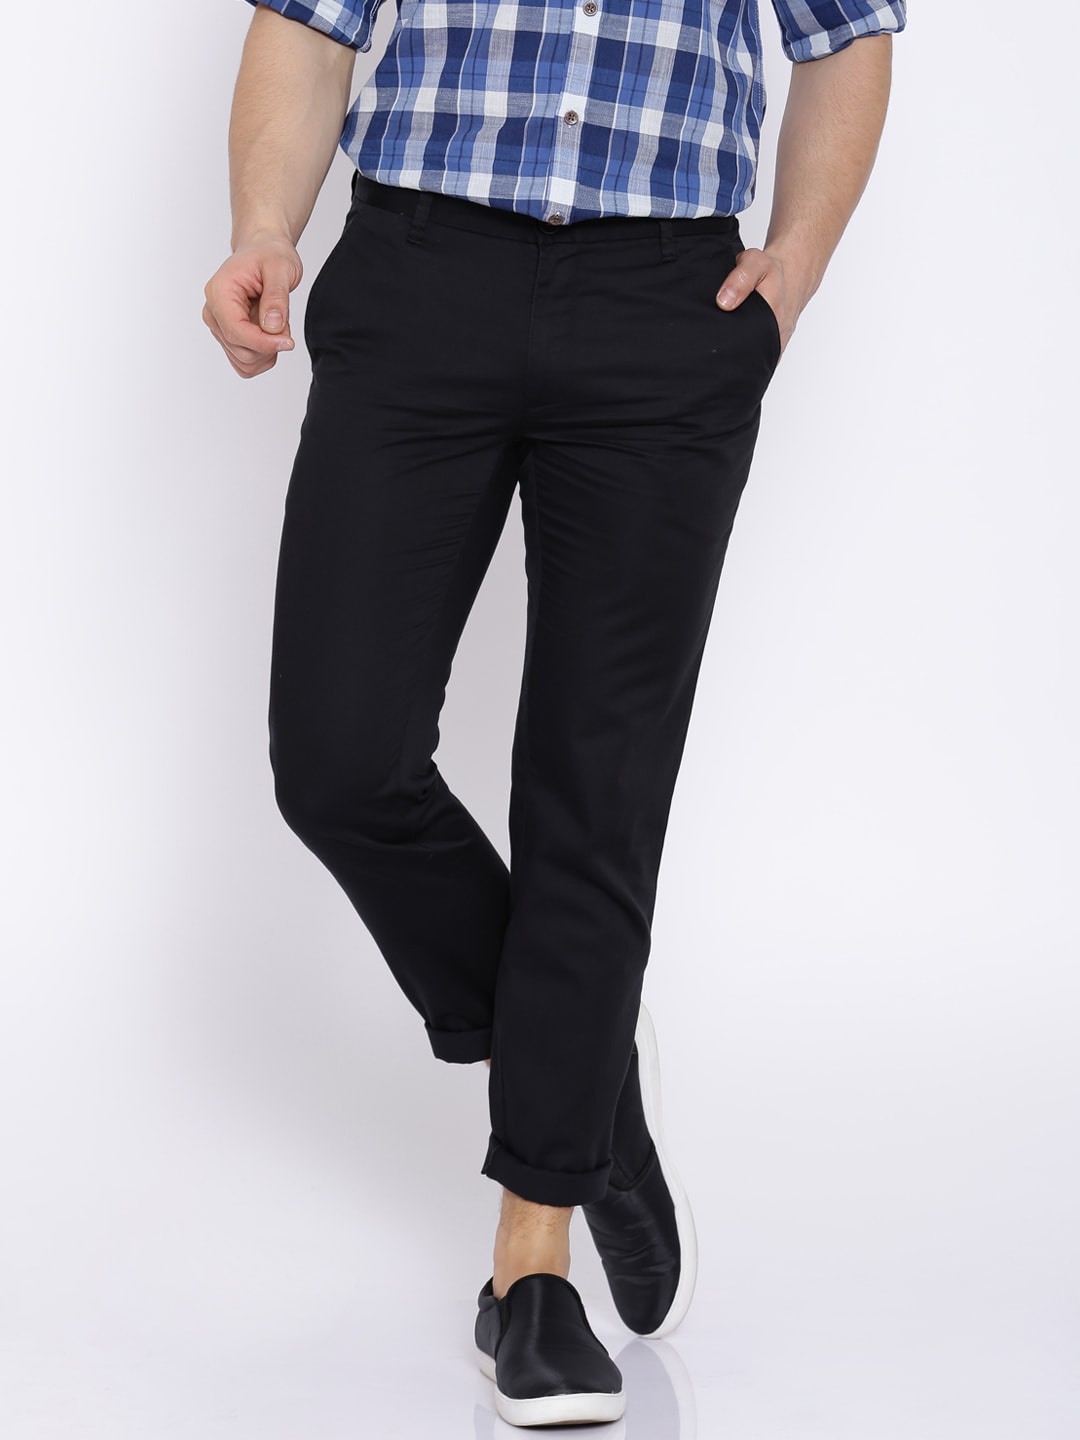 Charcoal Grey Regular Fit Solid Formal Trousers